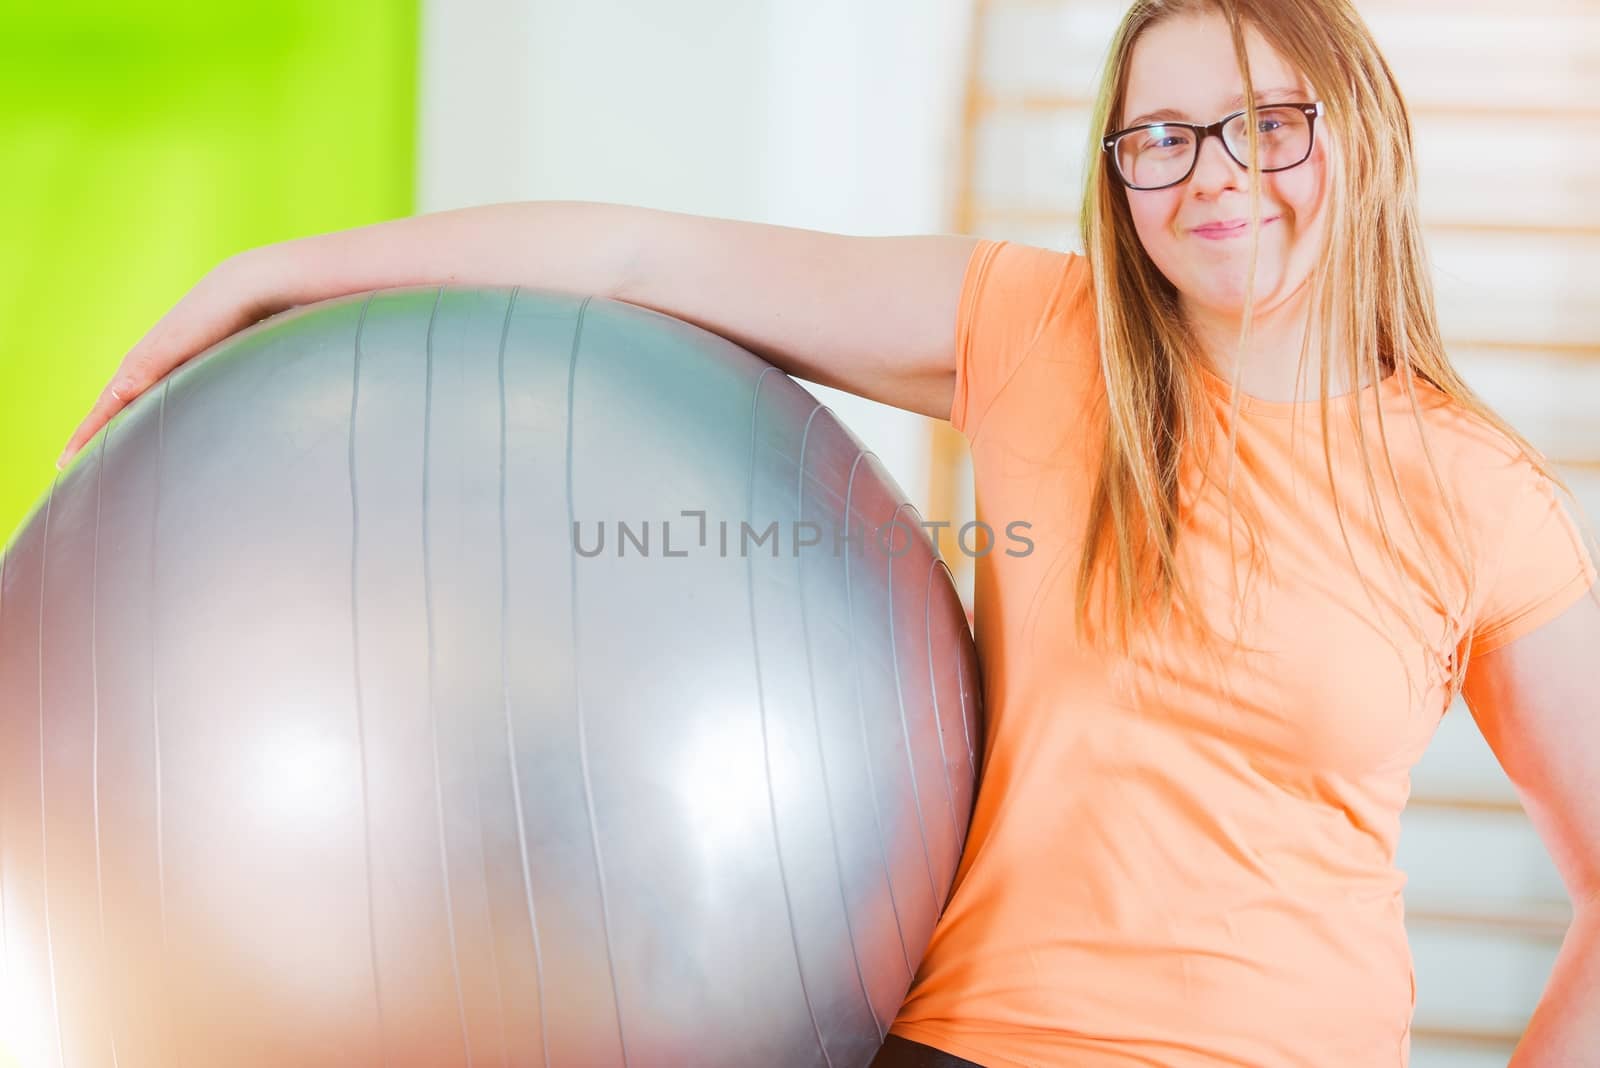 Exercise Ball Time by welcomia